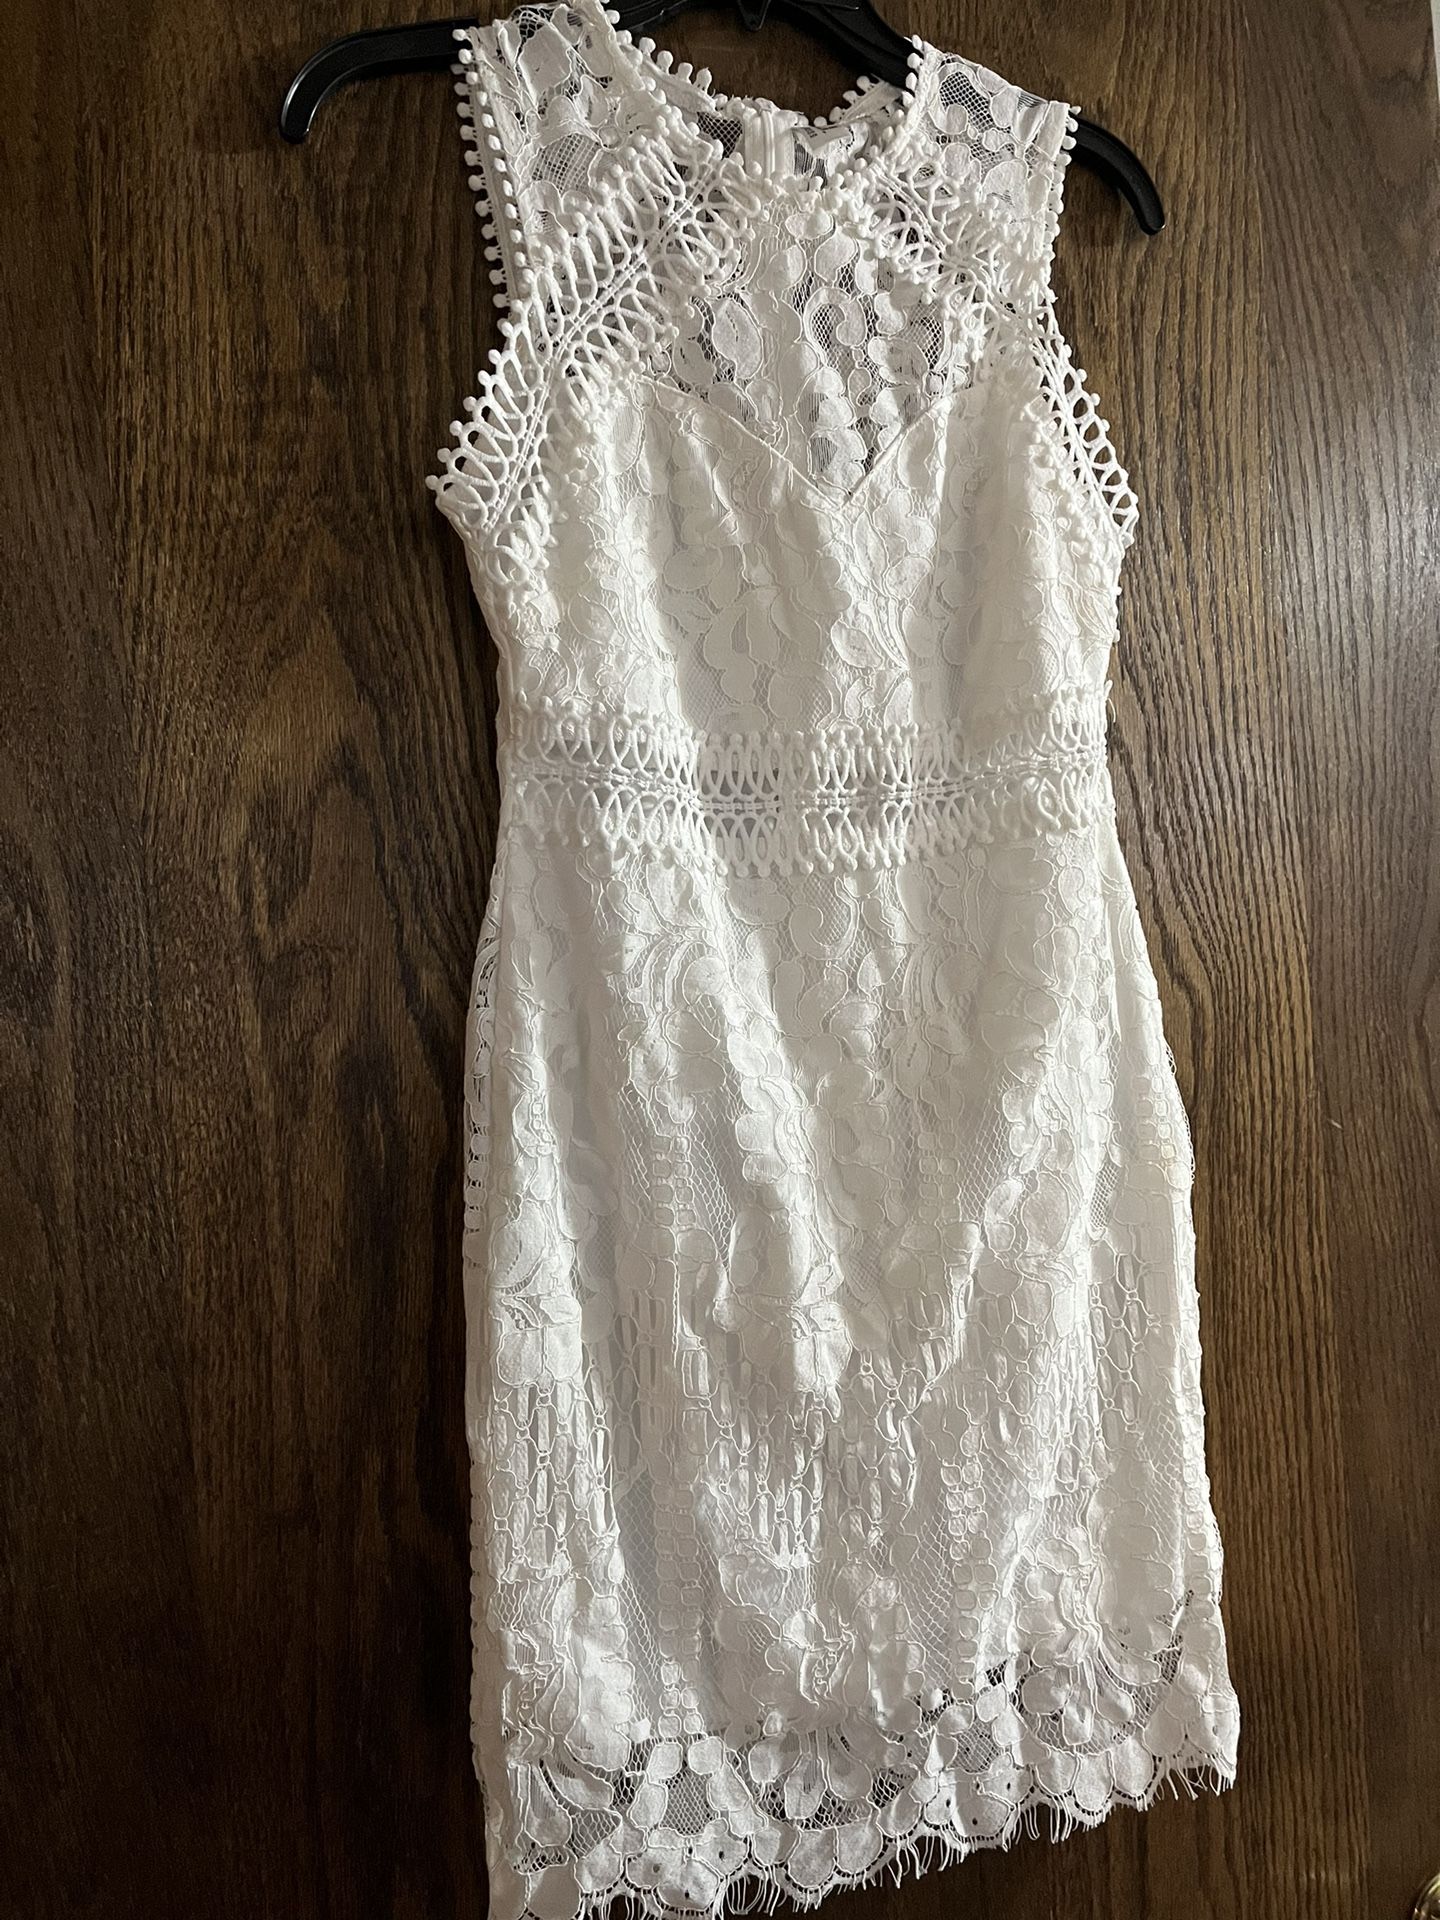 New No Tag White Lace Dress Knee Length Size Small